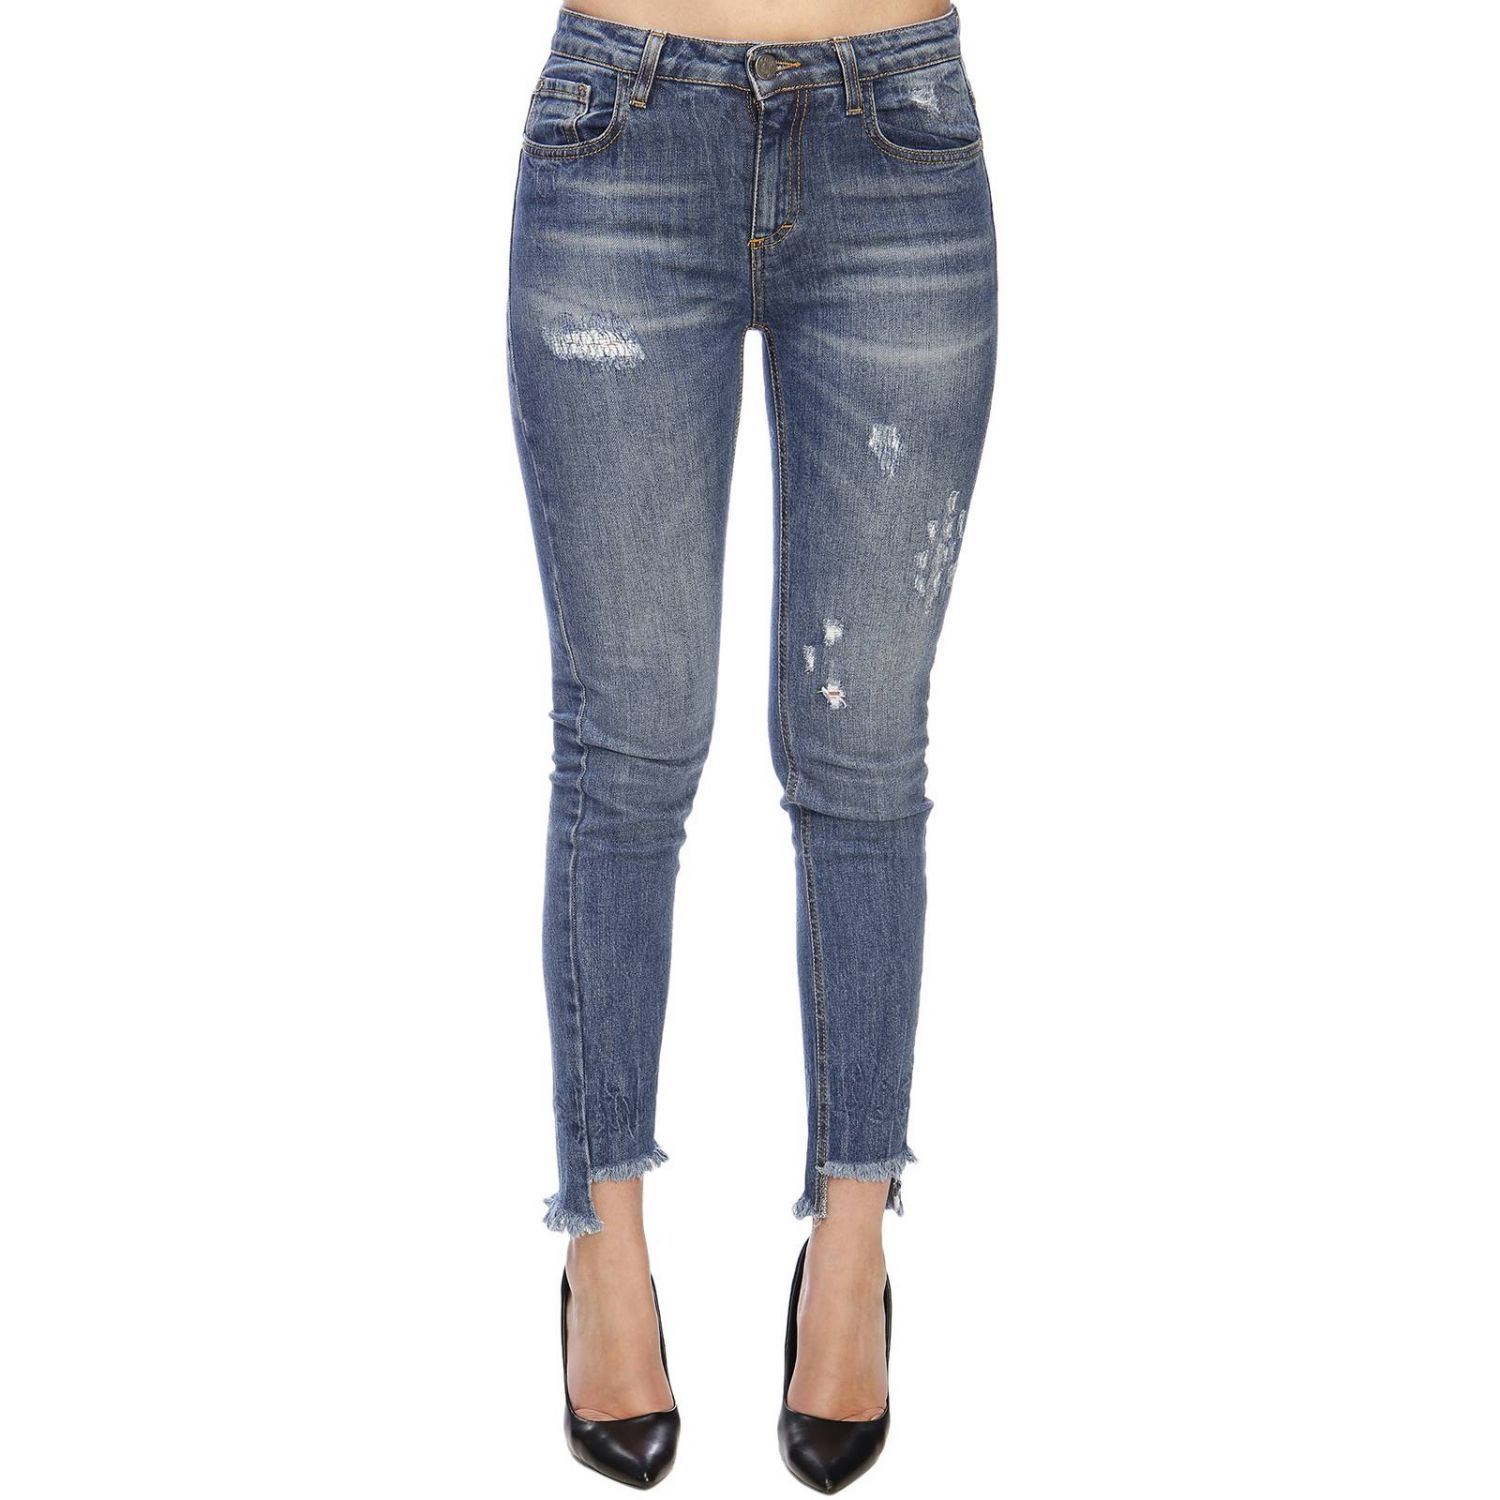 Frankie Morello Outlet: Jeans Simonne a 5 tasche in denim stretch used ...